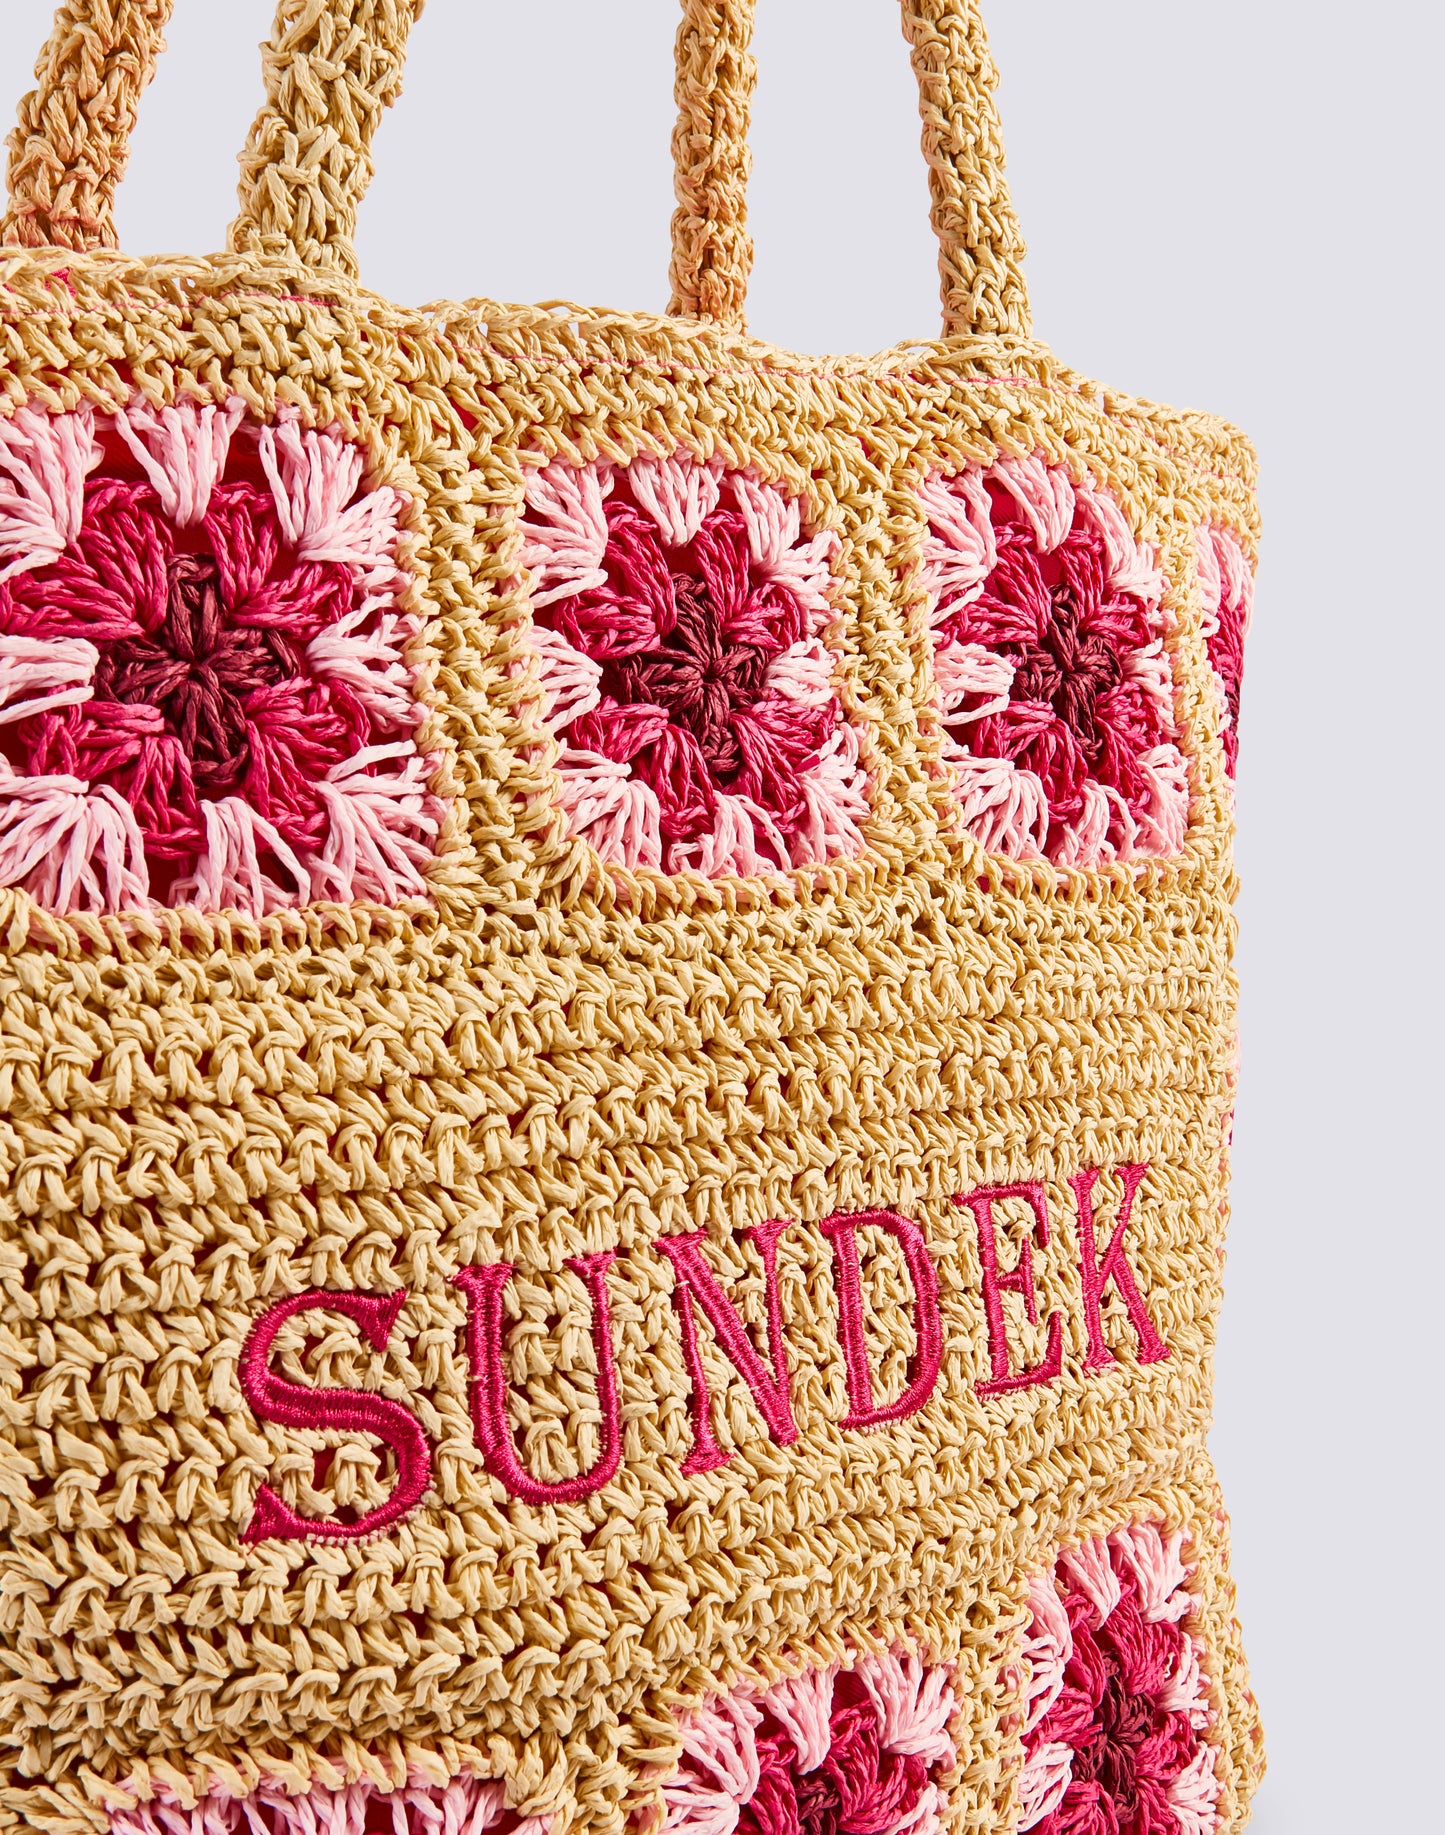 TERRA - PAPER STRAW BAG WITH EMBROIDERED LOGO